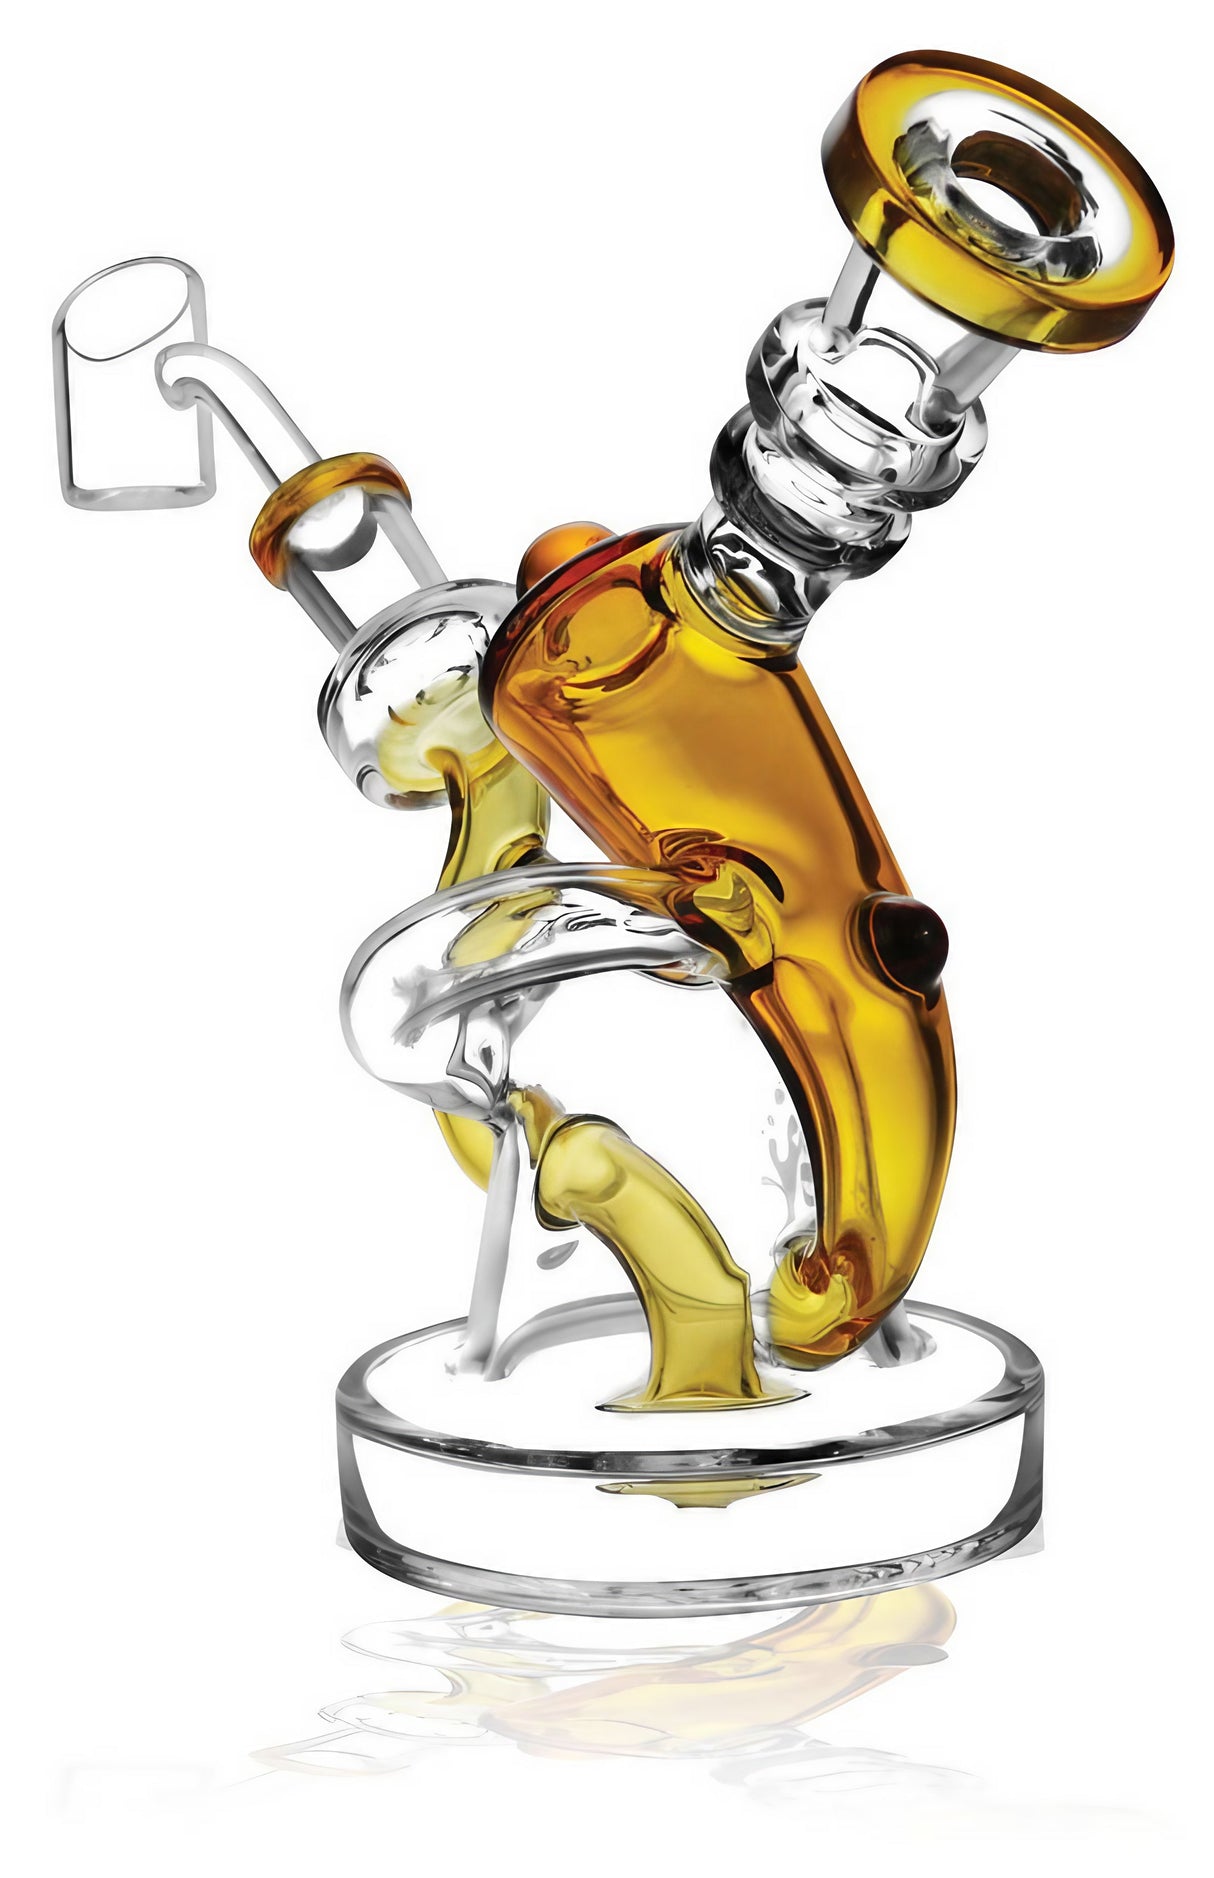 Pulsar Mini Vortex Recycler Rig in Amber, 6.5" Borosilicate Glass, Side View on White Background